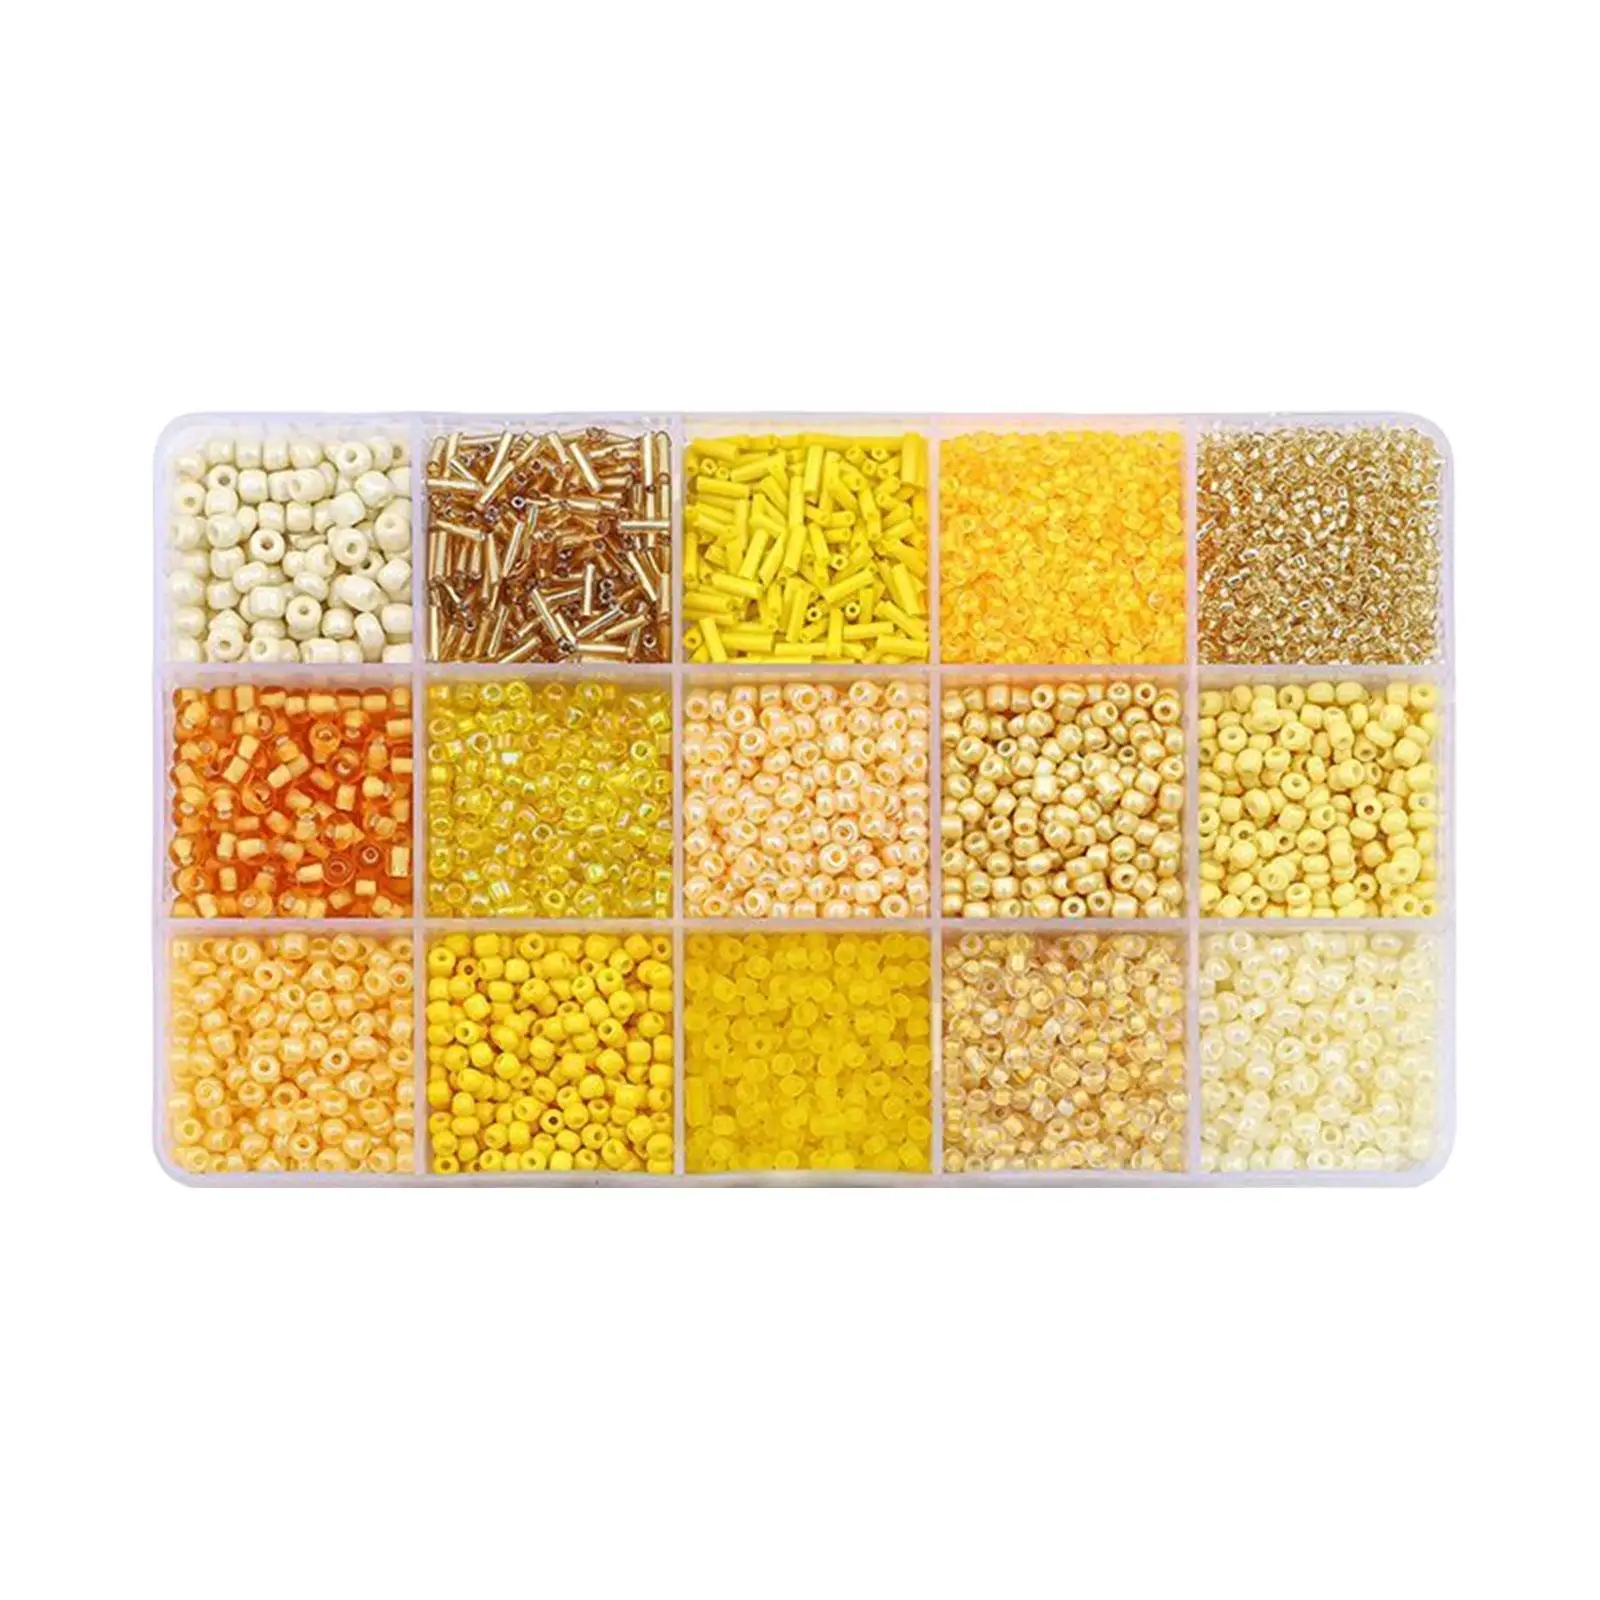 15 Grids Glass Beads for Bracelet Making Spacer Loose Beads with Storage Box Tube Beads Kit for Handcrafted Necklace Accessories